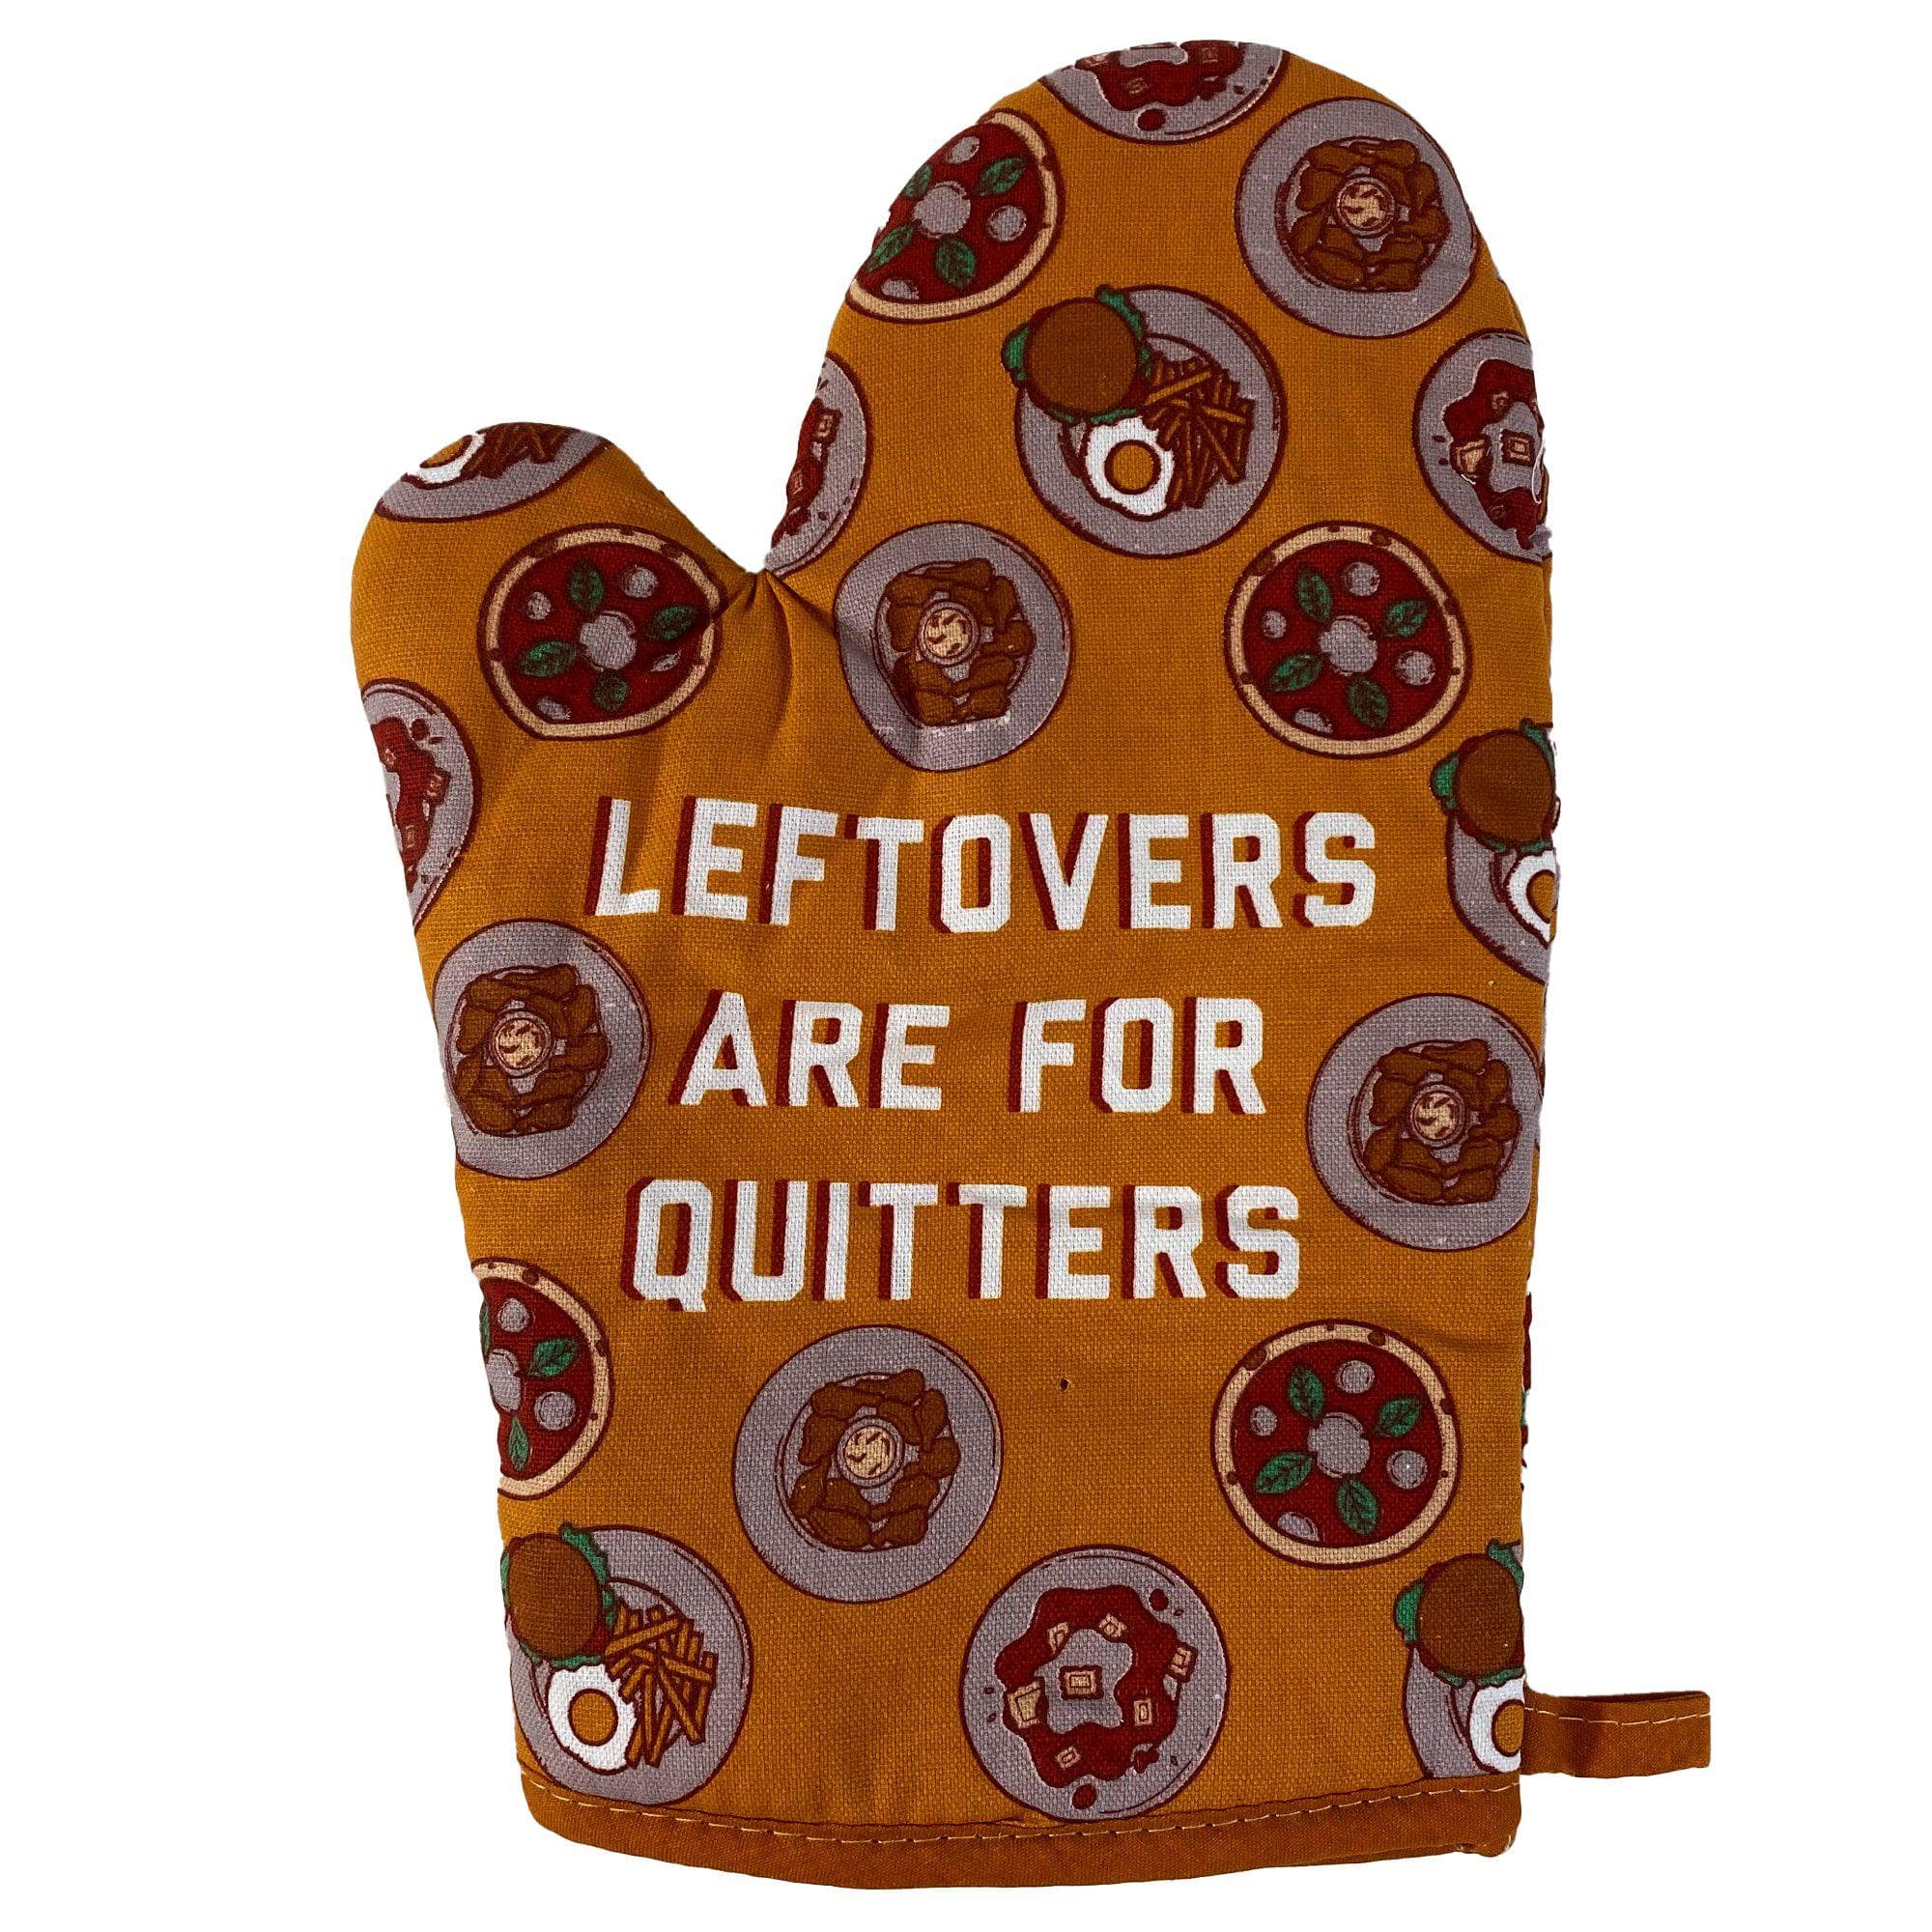 Leftovers Are For Quitters - Crazy Dog T-Shirts